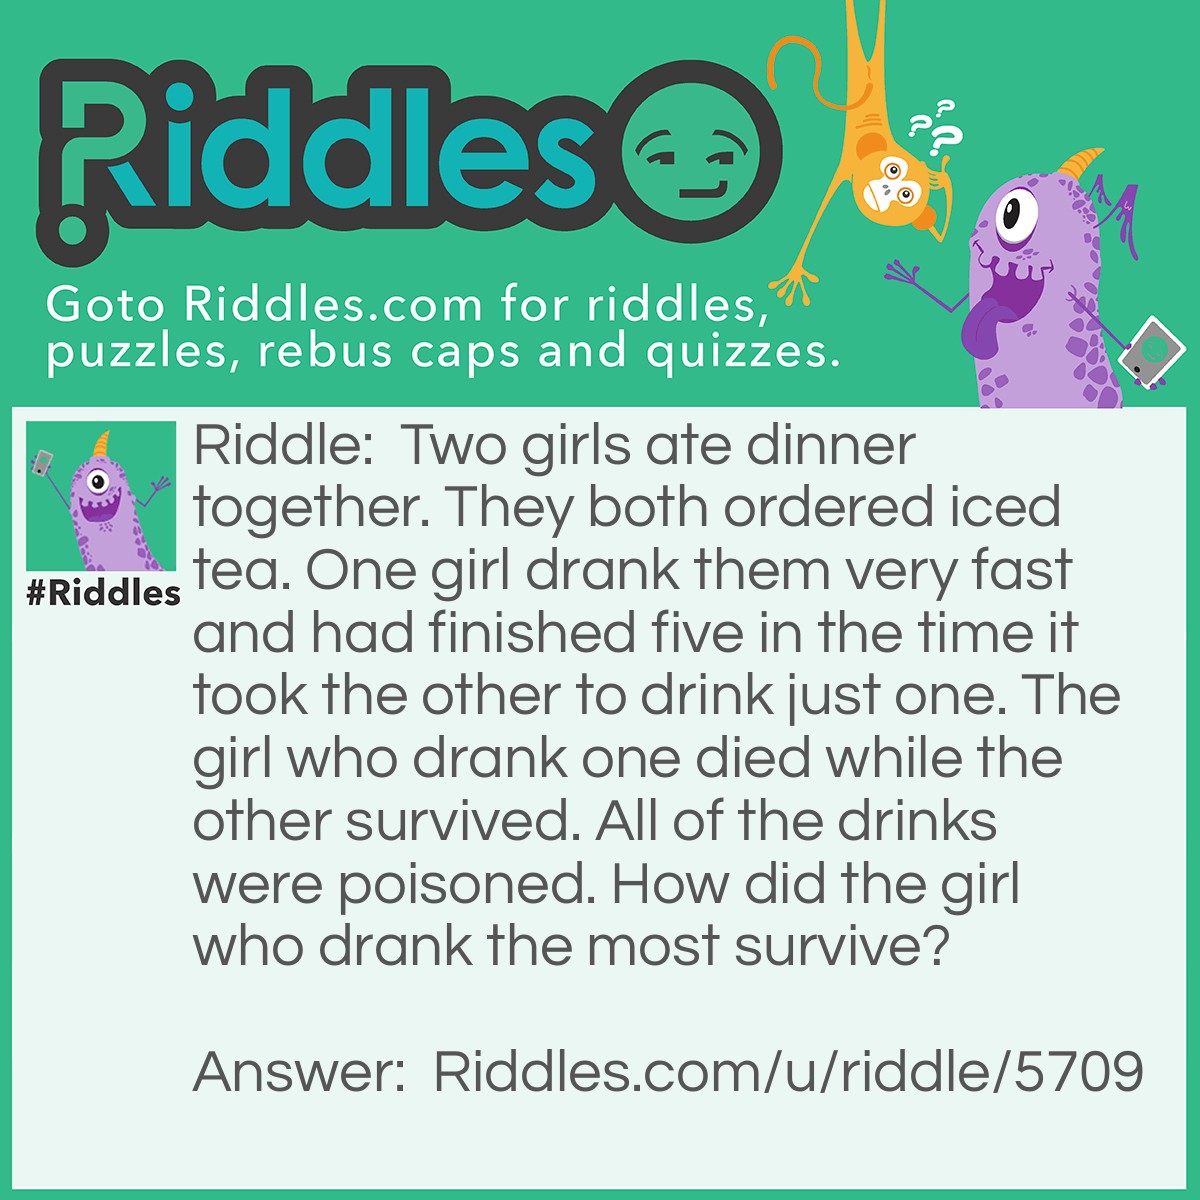 Riddle: Two girls ate dinner together. They both ordered iced tea. One girl drank them very fast and had finished five in the time it took the other to drink just one. The girl who drank one died while the other survived. All of the drinks were poisoned. How did the girl who drank the most survive? Answer: The poison was in the ice. The survivor girl didn't give time for the ice to melt. Whilst the dead girl waited until the ice melted which meant that the poison was released into her drink.